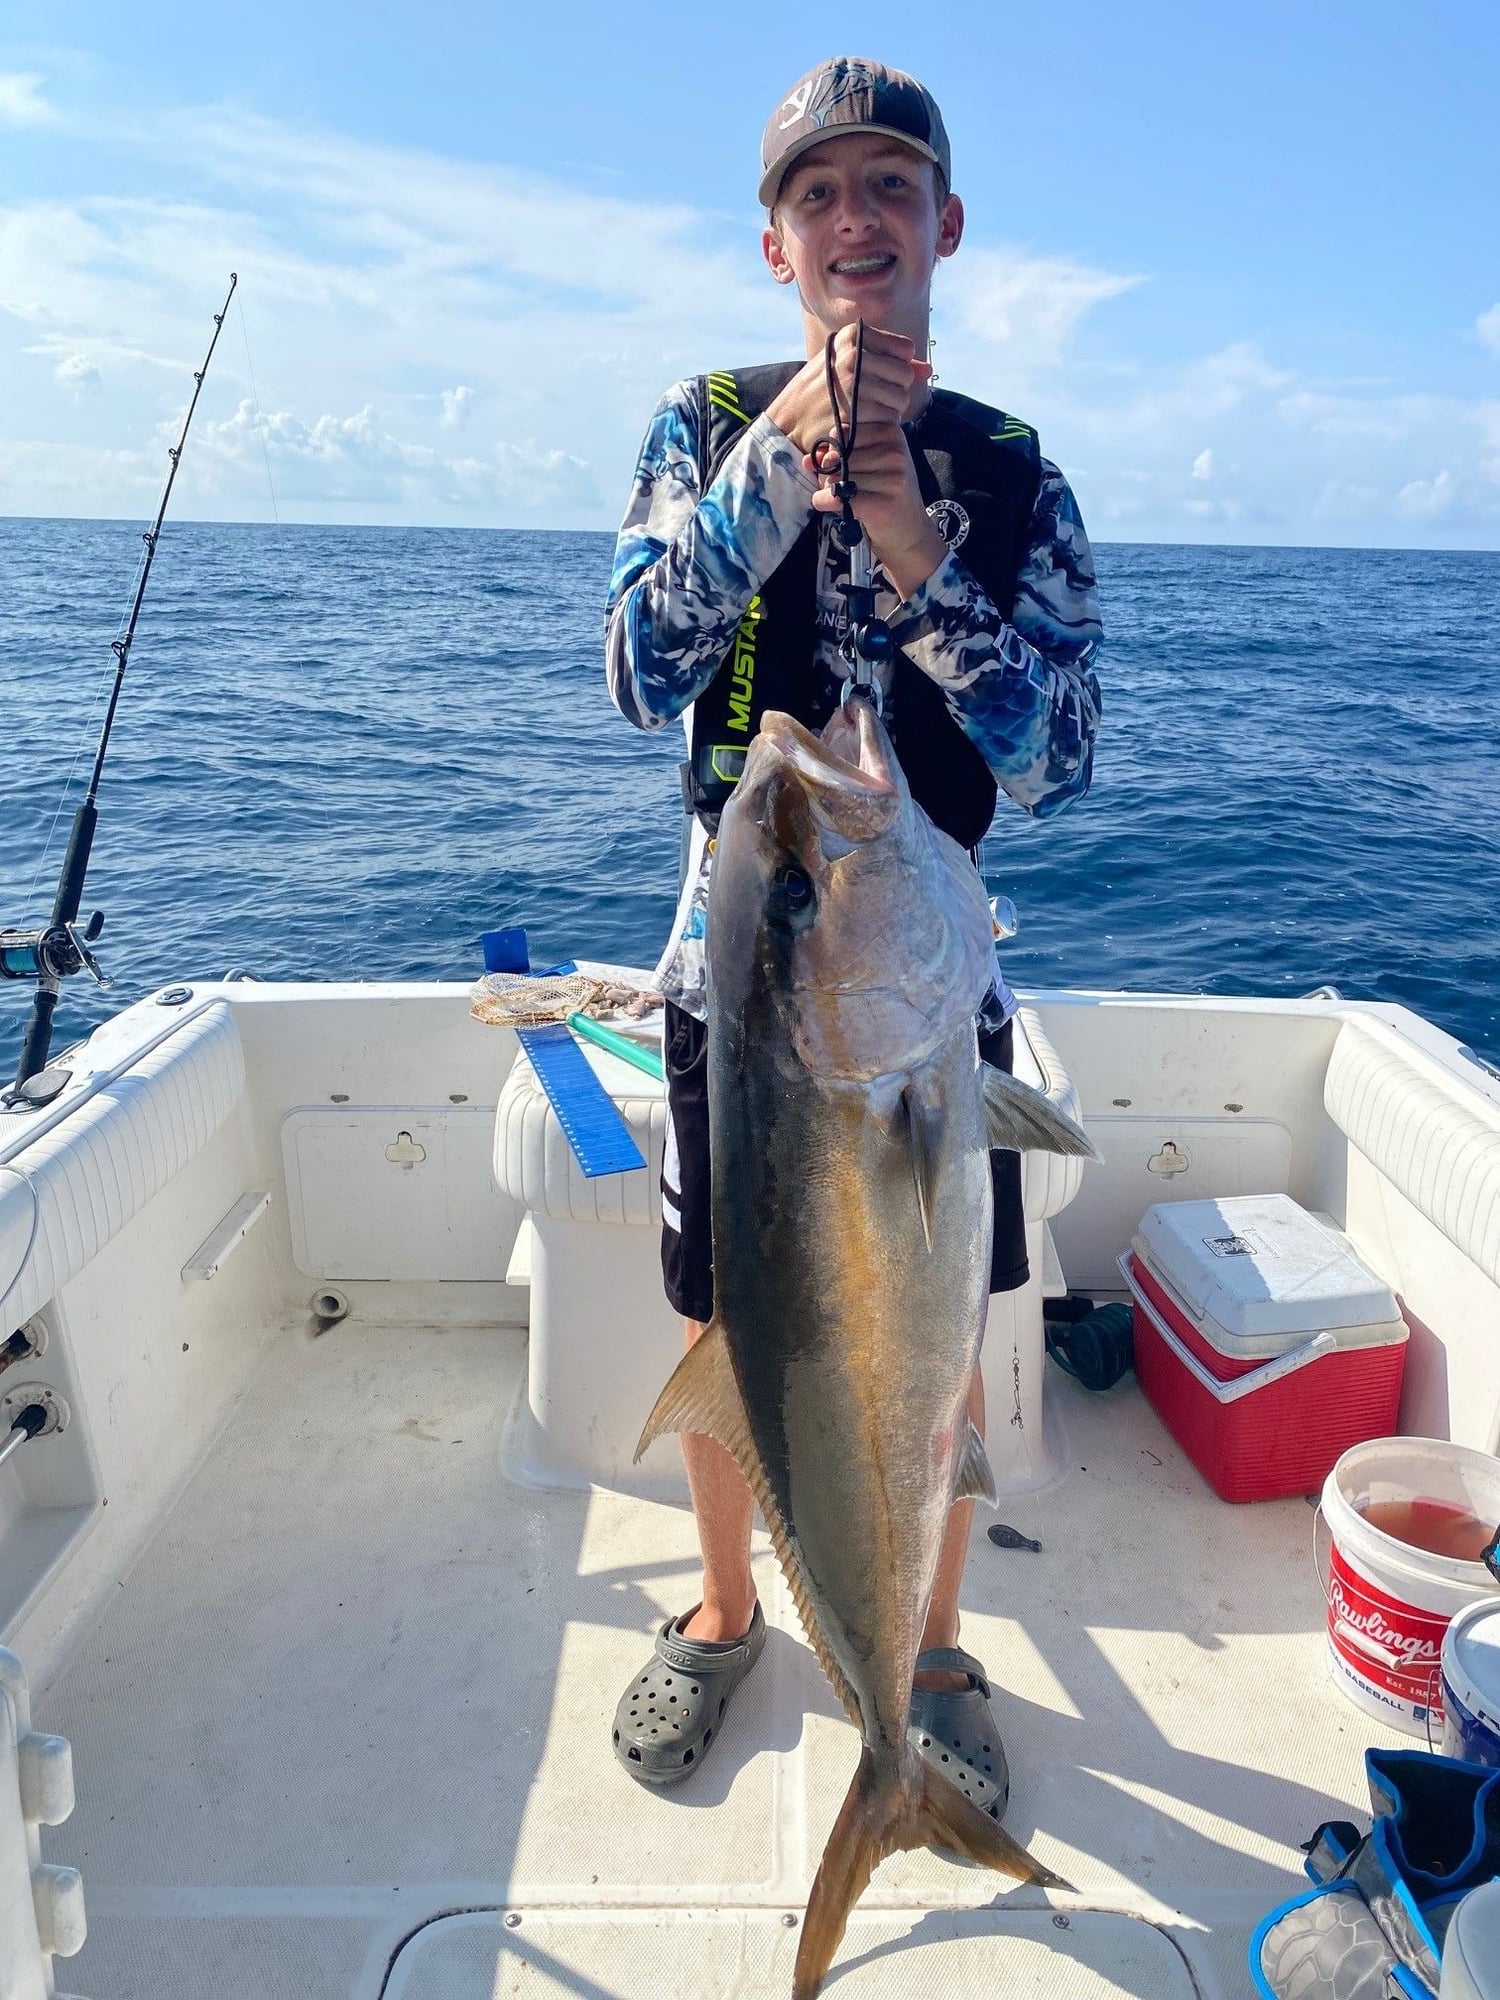 Amber Jack fishing CHS - The Hull Truth - Boating and Fishing Forum